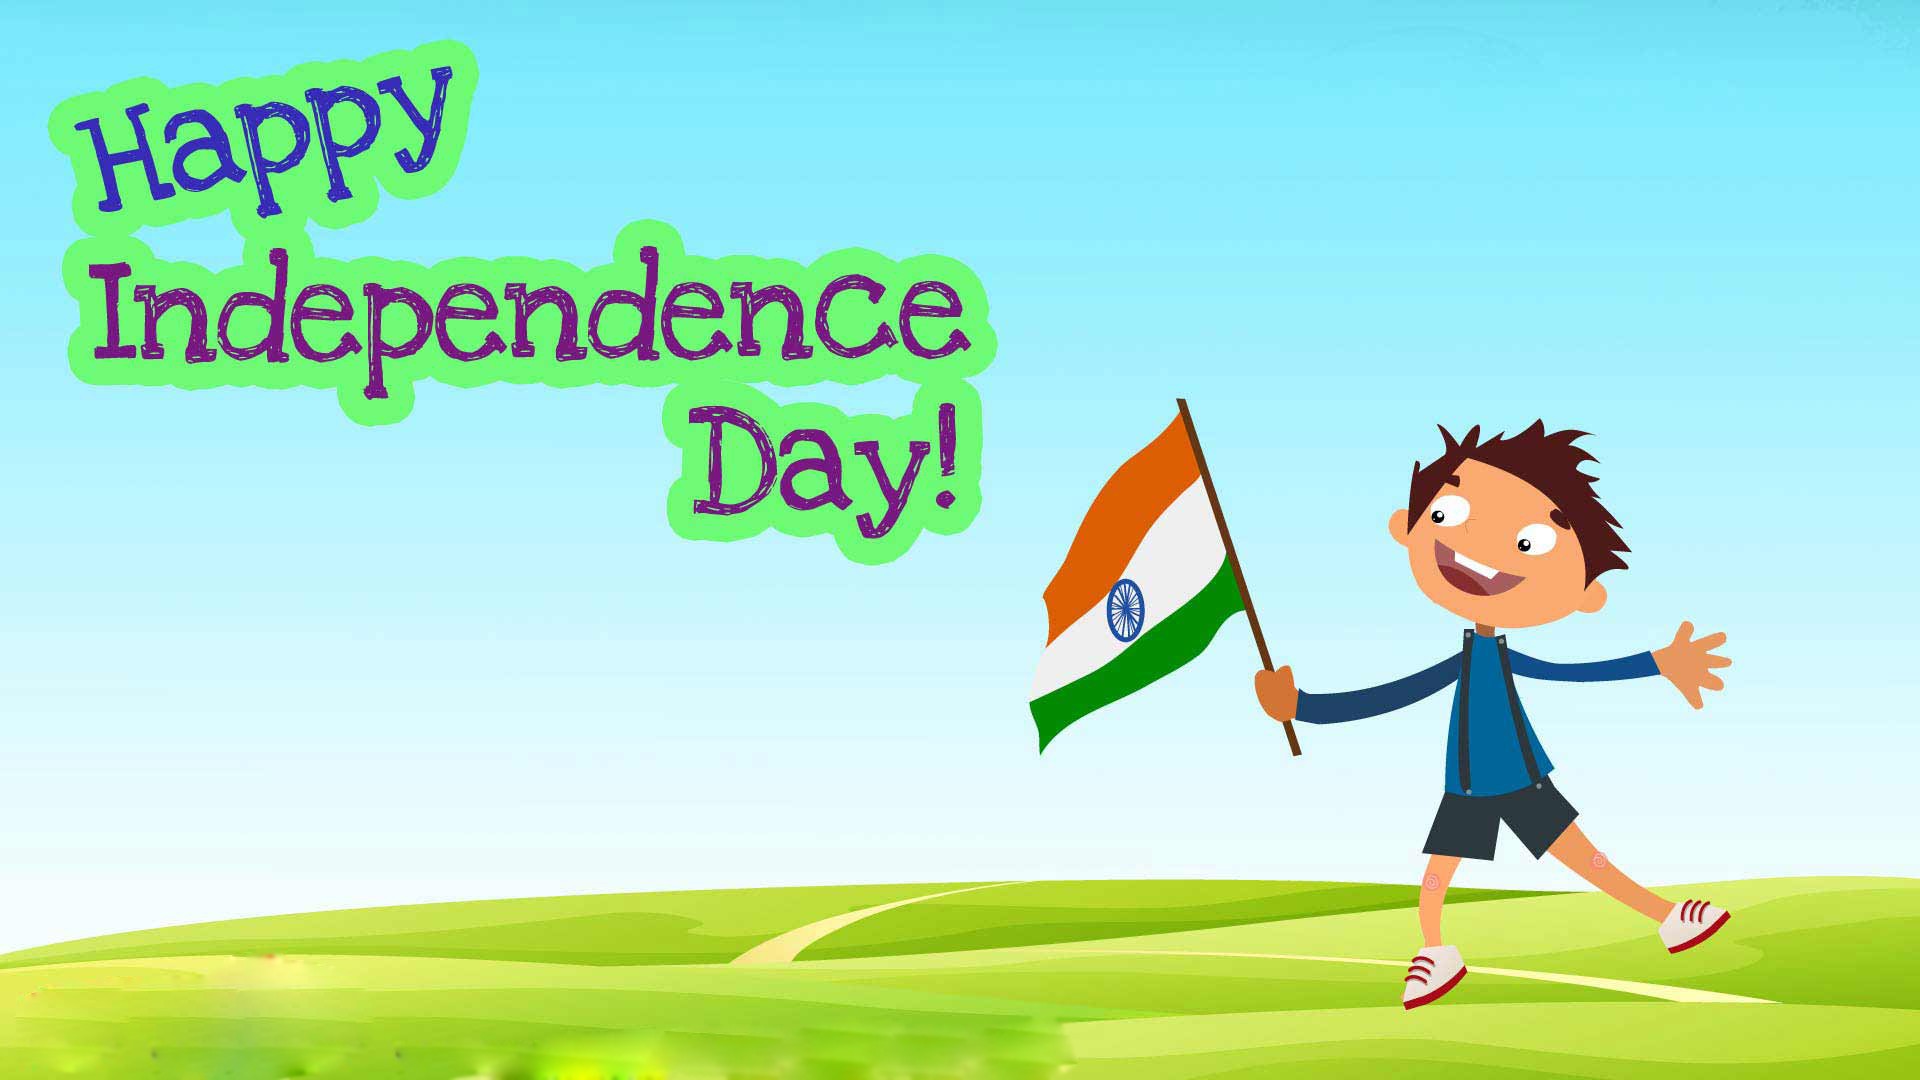 Best 75 Happy Independence Day Images, HD Wallpapers, Greeting and Photos  (Free Download) – The Popular Festivals